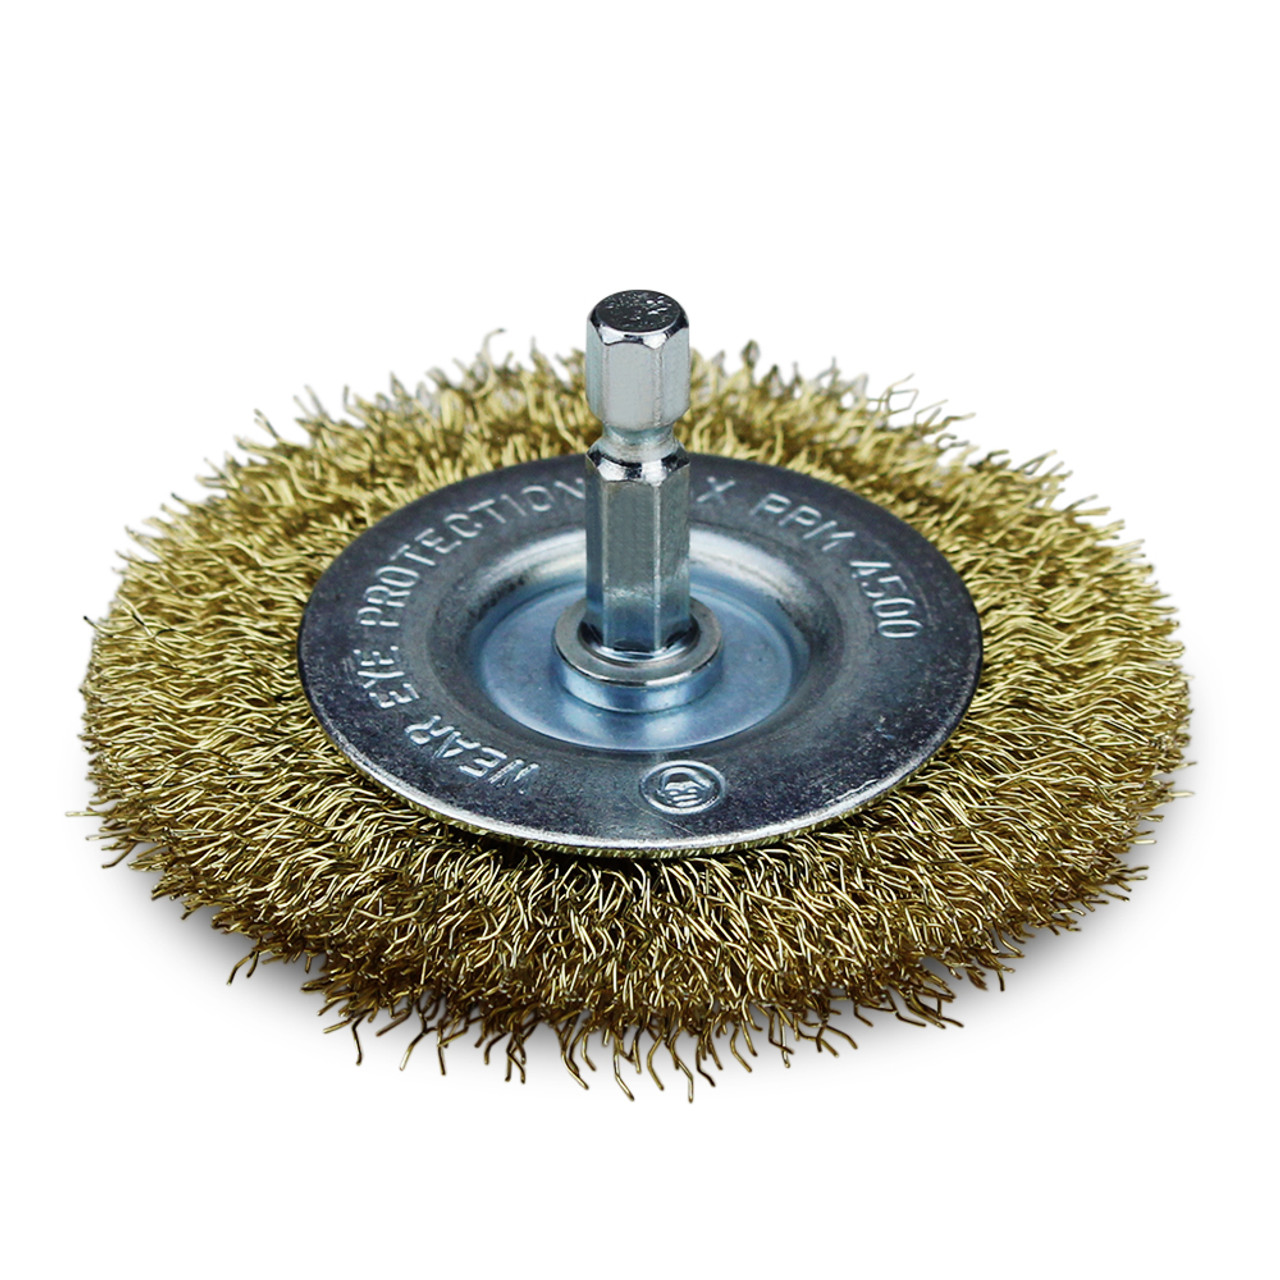 https://cdn11.bigcommerce.com/s-sgvho9y4/images/stencil/1280x1280/products/1142/6200/3-inch-wire-wheel-brass-coated-crimped__44425.1675189072.jpg?c=2